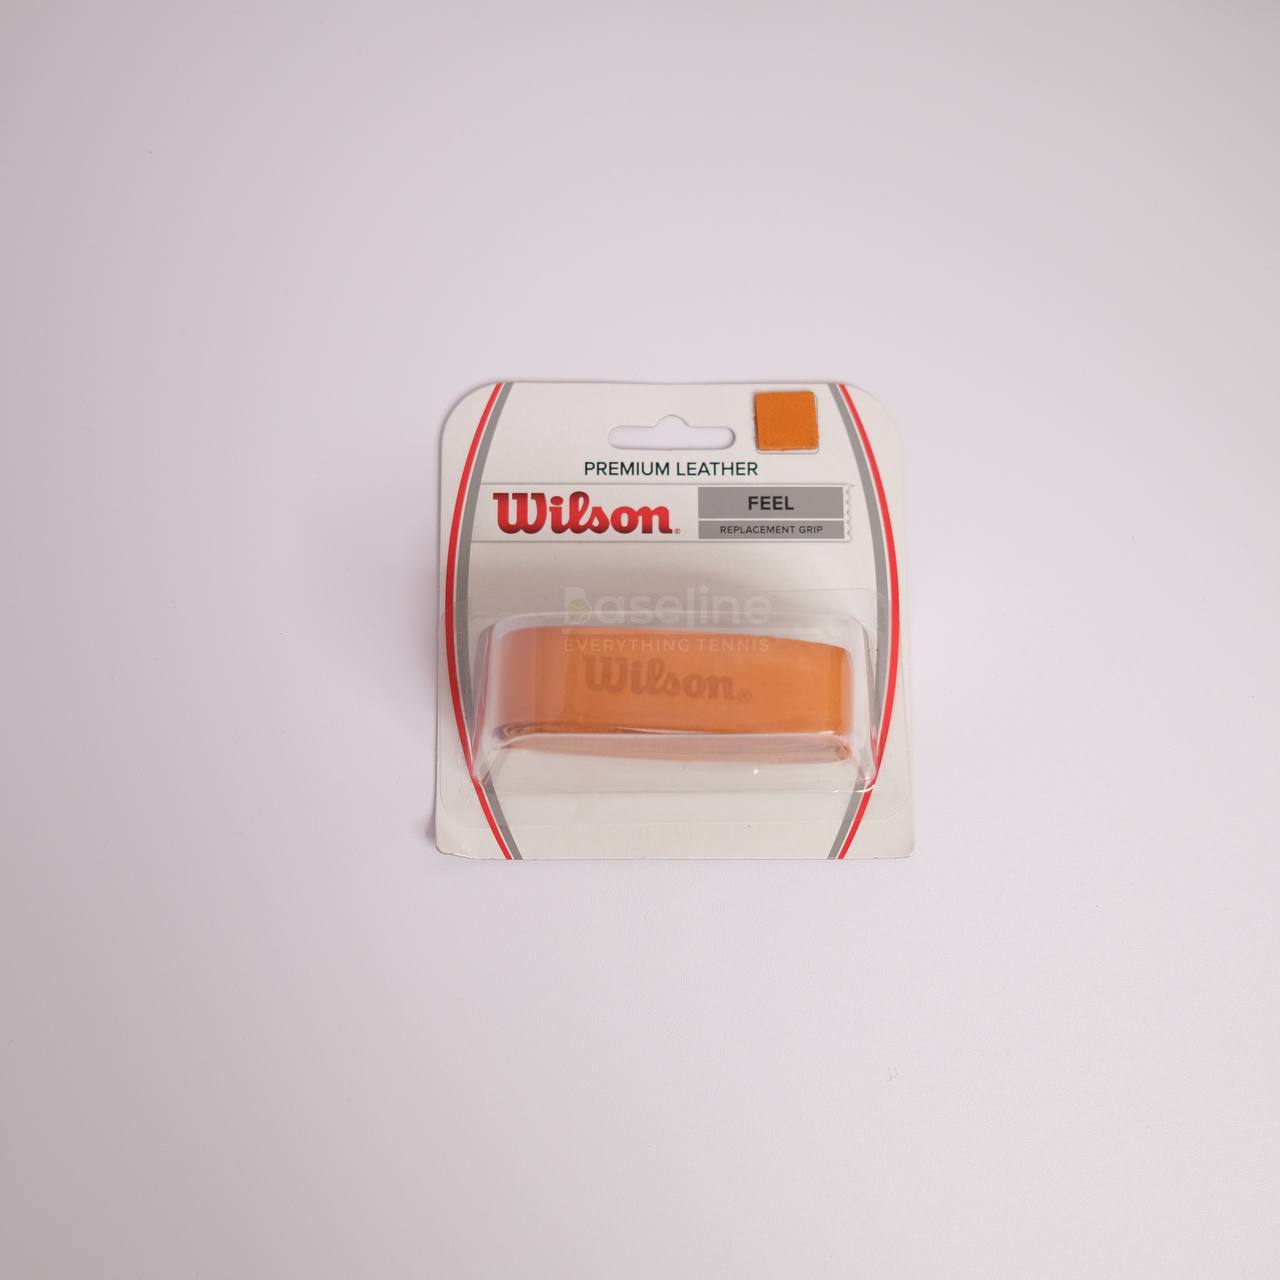 Wilson Leather Replacement Grip